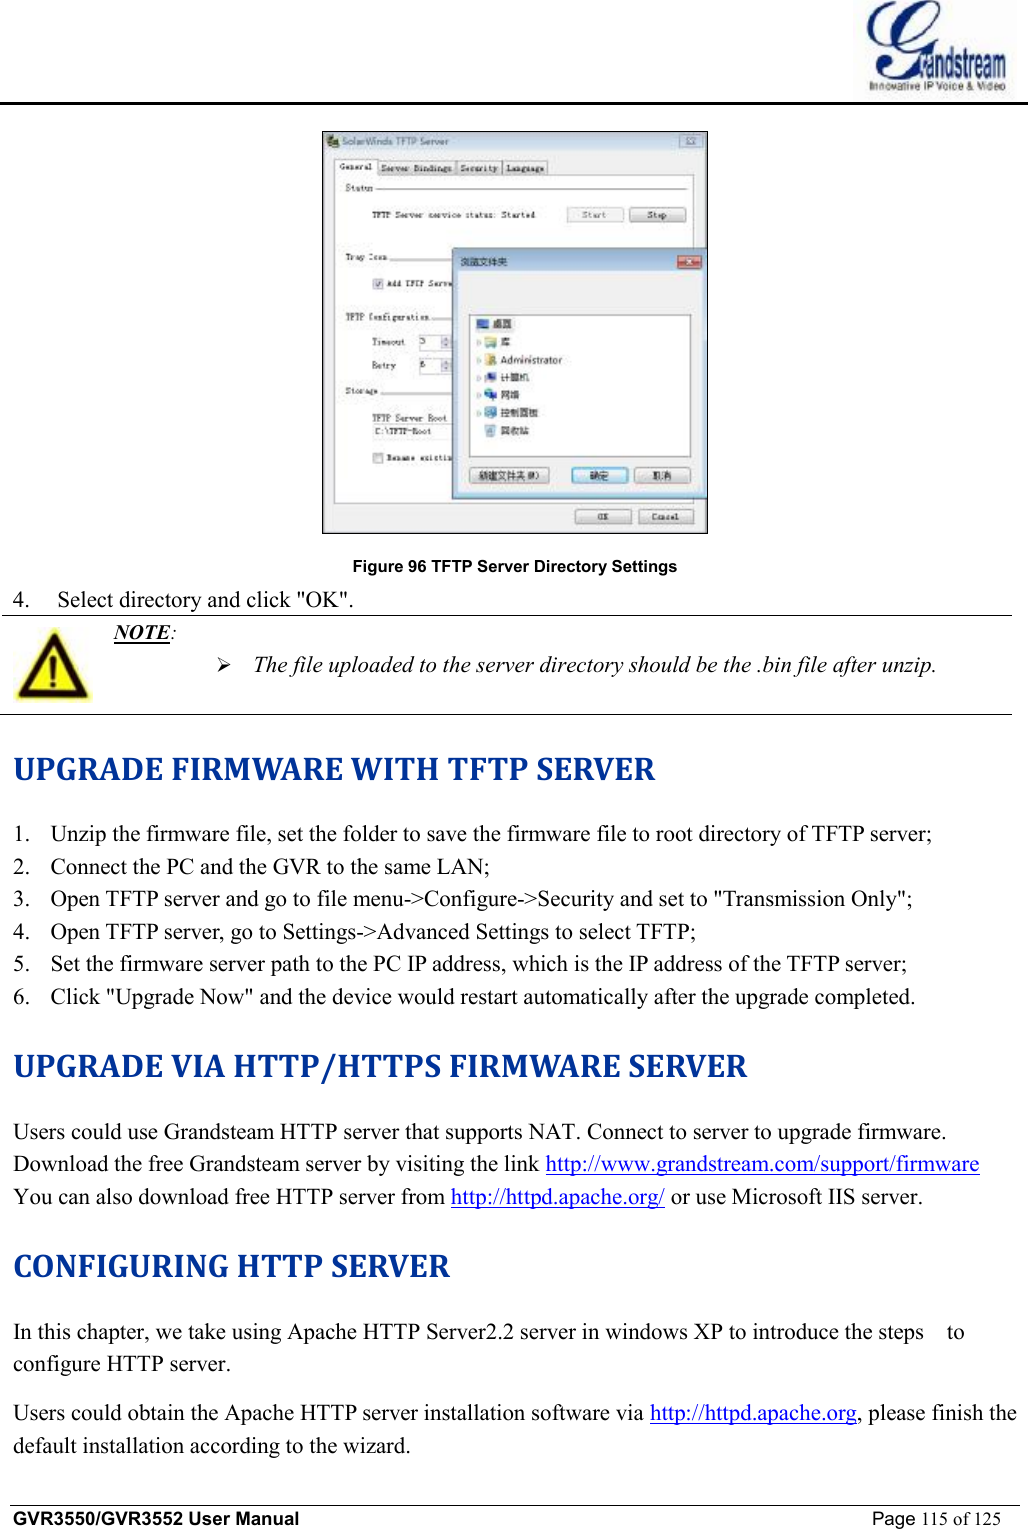    GVR3550/GVR3552 User Manual                                                             Page 115 of 125         Figure 96 TFTP Server Directory Settings 4. Select directory and click &quot;OK&quot;.  NOTE:  Ø The file uploaded to the server directory should be the .bin file after unzip. UPGRADE FIRMWARE WITH TFTP SERVER 1. Unzip the firmware file, set the folder to save the firmware file to root directory of TFTP server; 2. Connect the PC and the GVR to the same LAN; 3. Open TFTP server and go to file menu-&gt;Configure-&gt;Security and set to &quot;Transmission Only&quot;; 4. Open TFTP server, go to Settings-&gt;Advanced Settings to select TFTP; 5. Set the firmware server path to the PC IP address, which is the IP address of the TFTP server; 6. Click &quot;Upgrade Now&quot; and the device would restart automatically after the upgrade completed. UPGRADE VIA HTTP/HTTPS FIRMWARE SERVER Users could use Grandsteam HTTP server that supports NAT. Connect to server to upgrade firmware. Download the free Grandsteam server by visiting the link http://www.grandstream.com/support/firmware You can also download free HTTP server from http://httpd.apache.org/ or use Microsoft IIS server. CONFIGURING HTTP SERVER In this chapter, we take using Apache HTTP Server2.2 server in windows XP to introduce the steps  to configure HTTP server. Users could obtain the Apache HTTP server installation software via http://httpd.apache.org, please finish the default installation according to the wizard. 